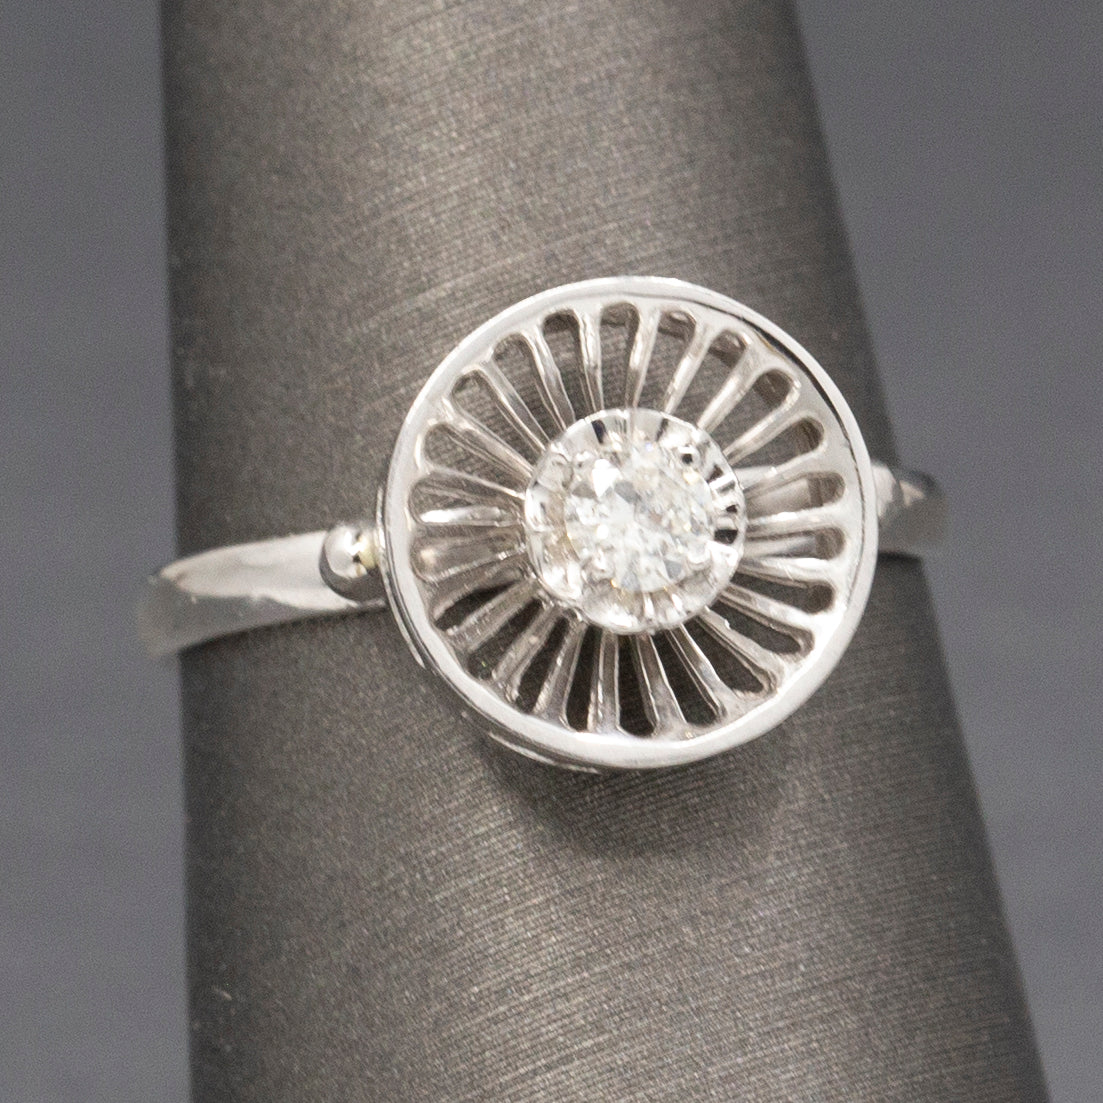 Diamond and Knife Wire Work Antique Hat Pin Conversion Ring in 14k White Gold